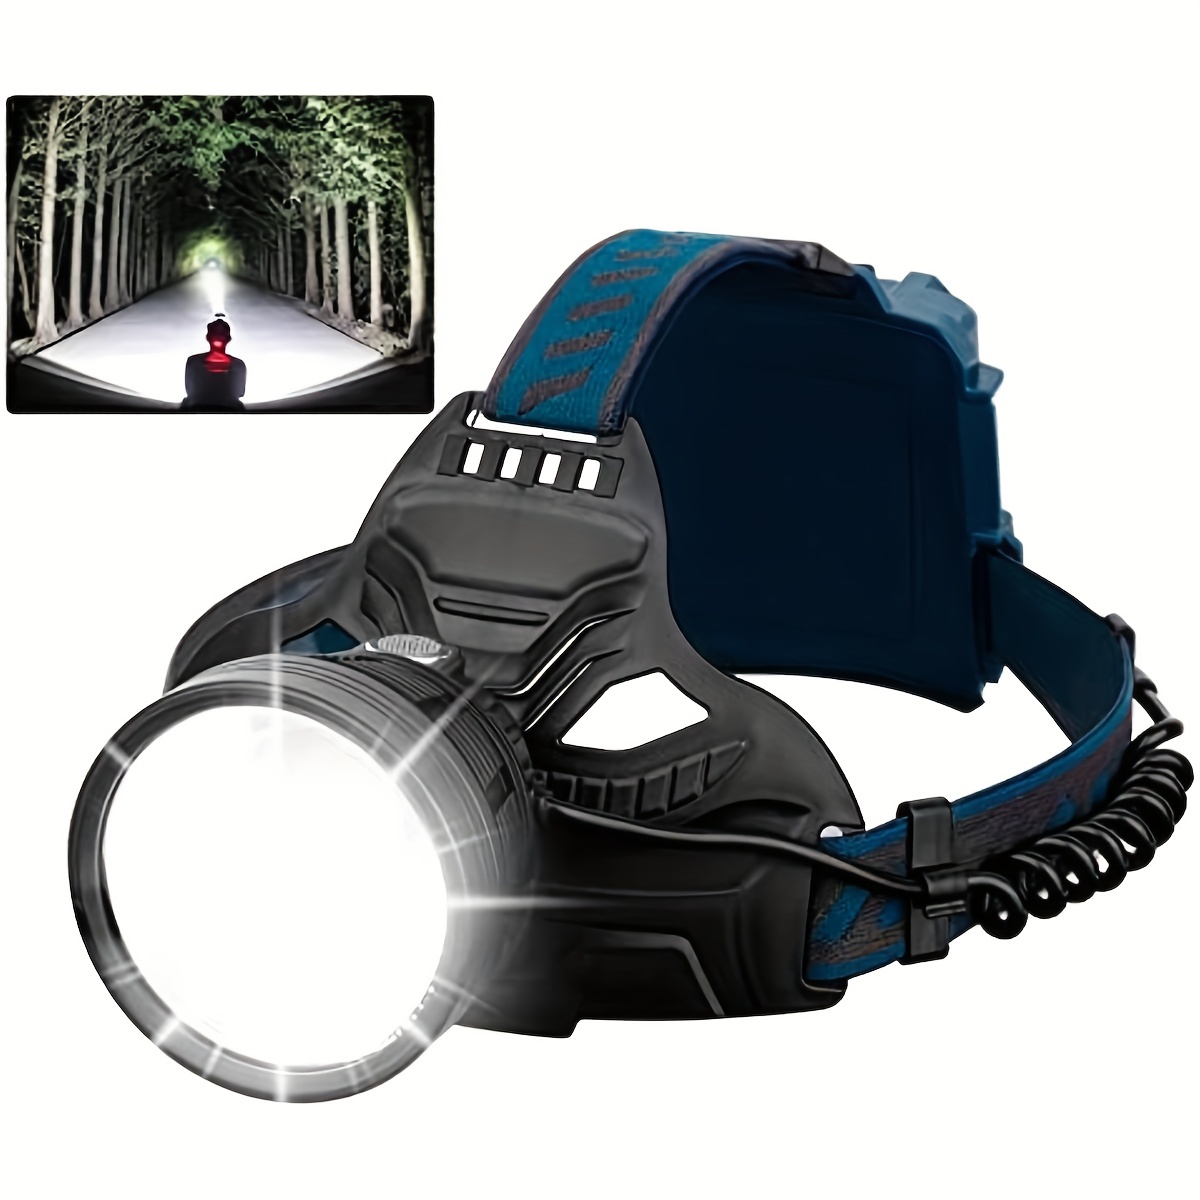 NUCWO 200000 Lumens Headlamp Rechargeable XHP70.2 Super Bright Powerful LED  Headlamp,Adjust Focus 3 Modes Waterproof Headlight,Power Bank Function for  Camping Biking Hiking (a) 